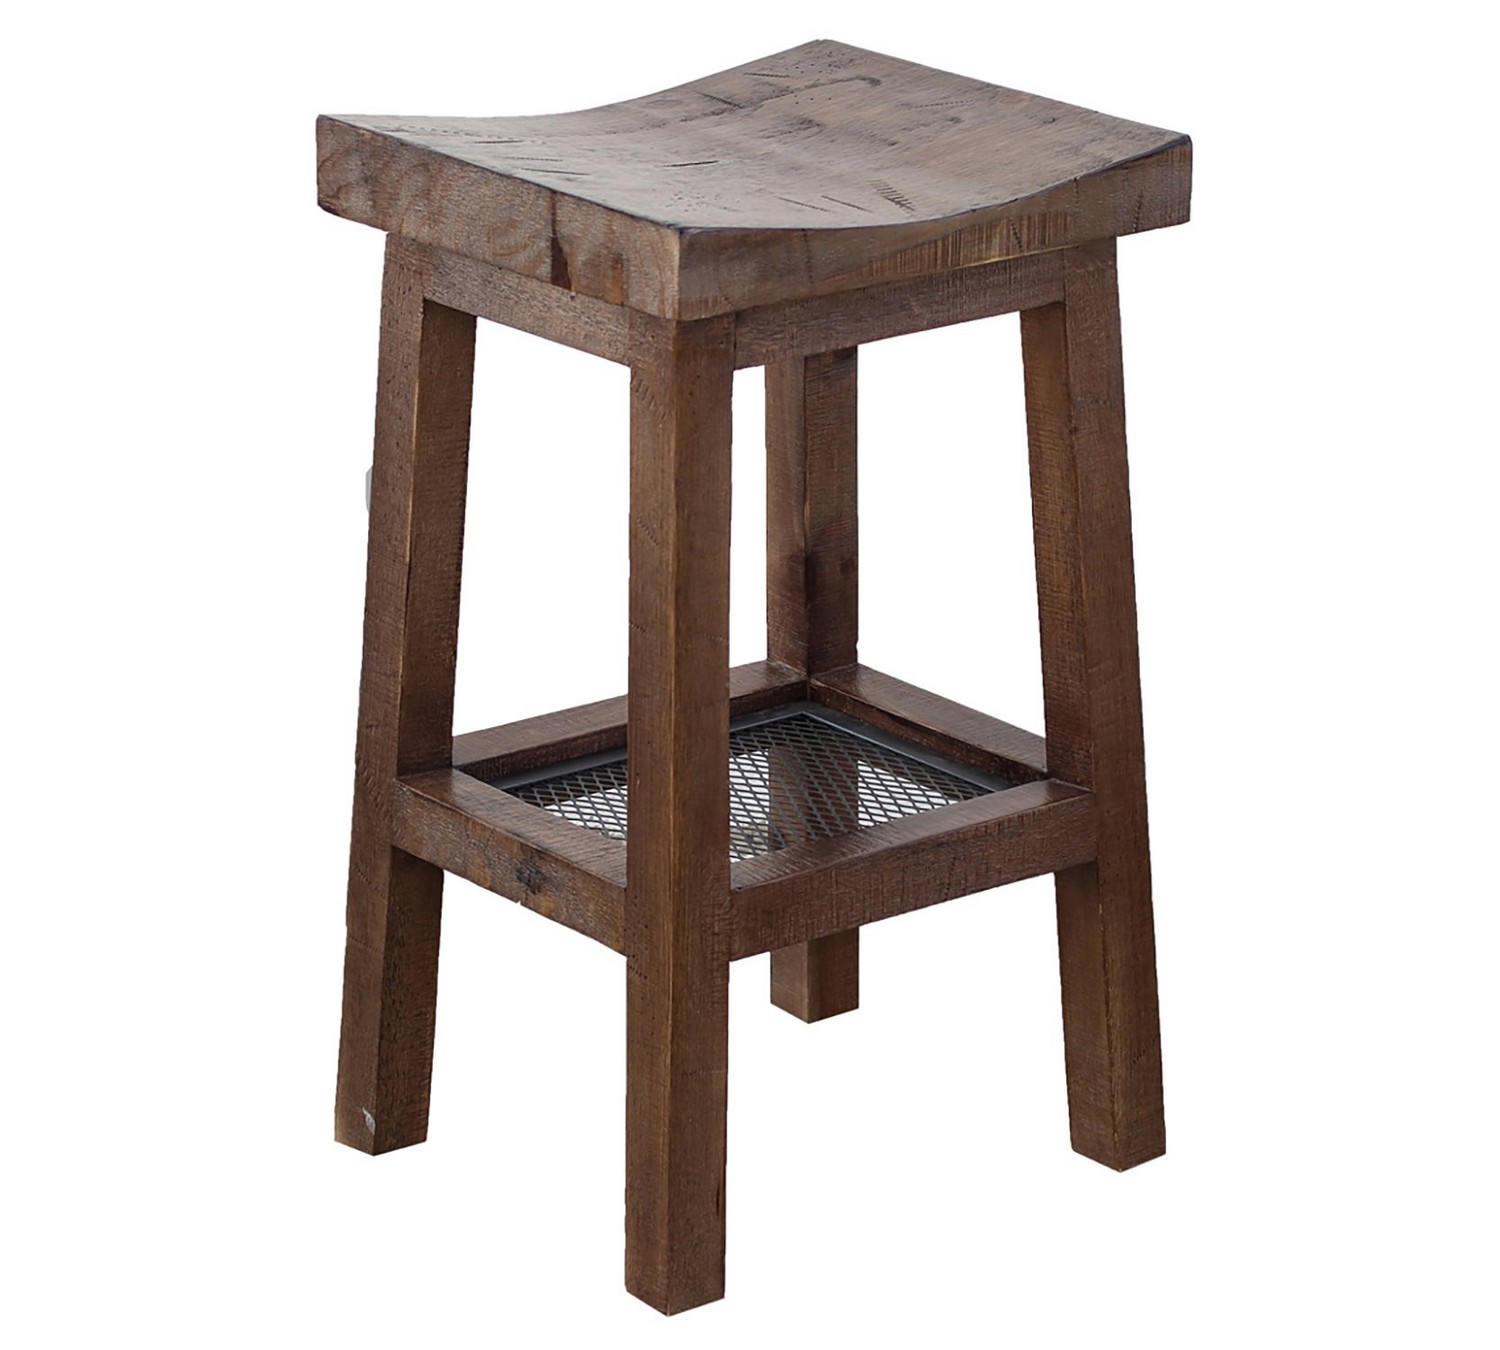 Parker House Lapaz Counter Stool - Rustic Worn Pine